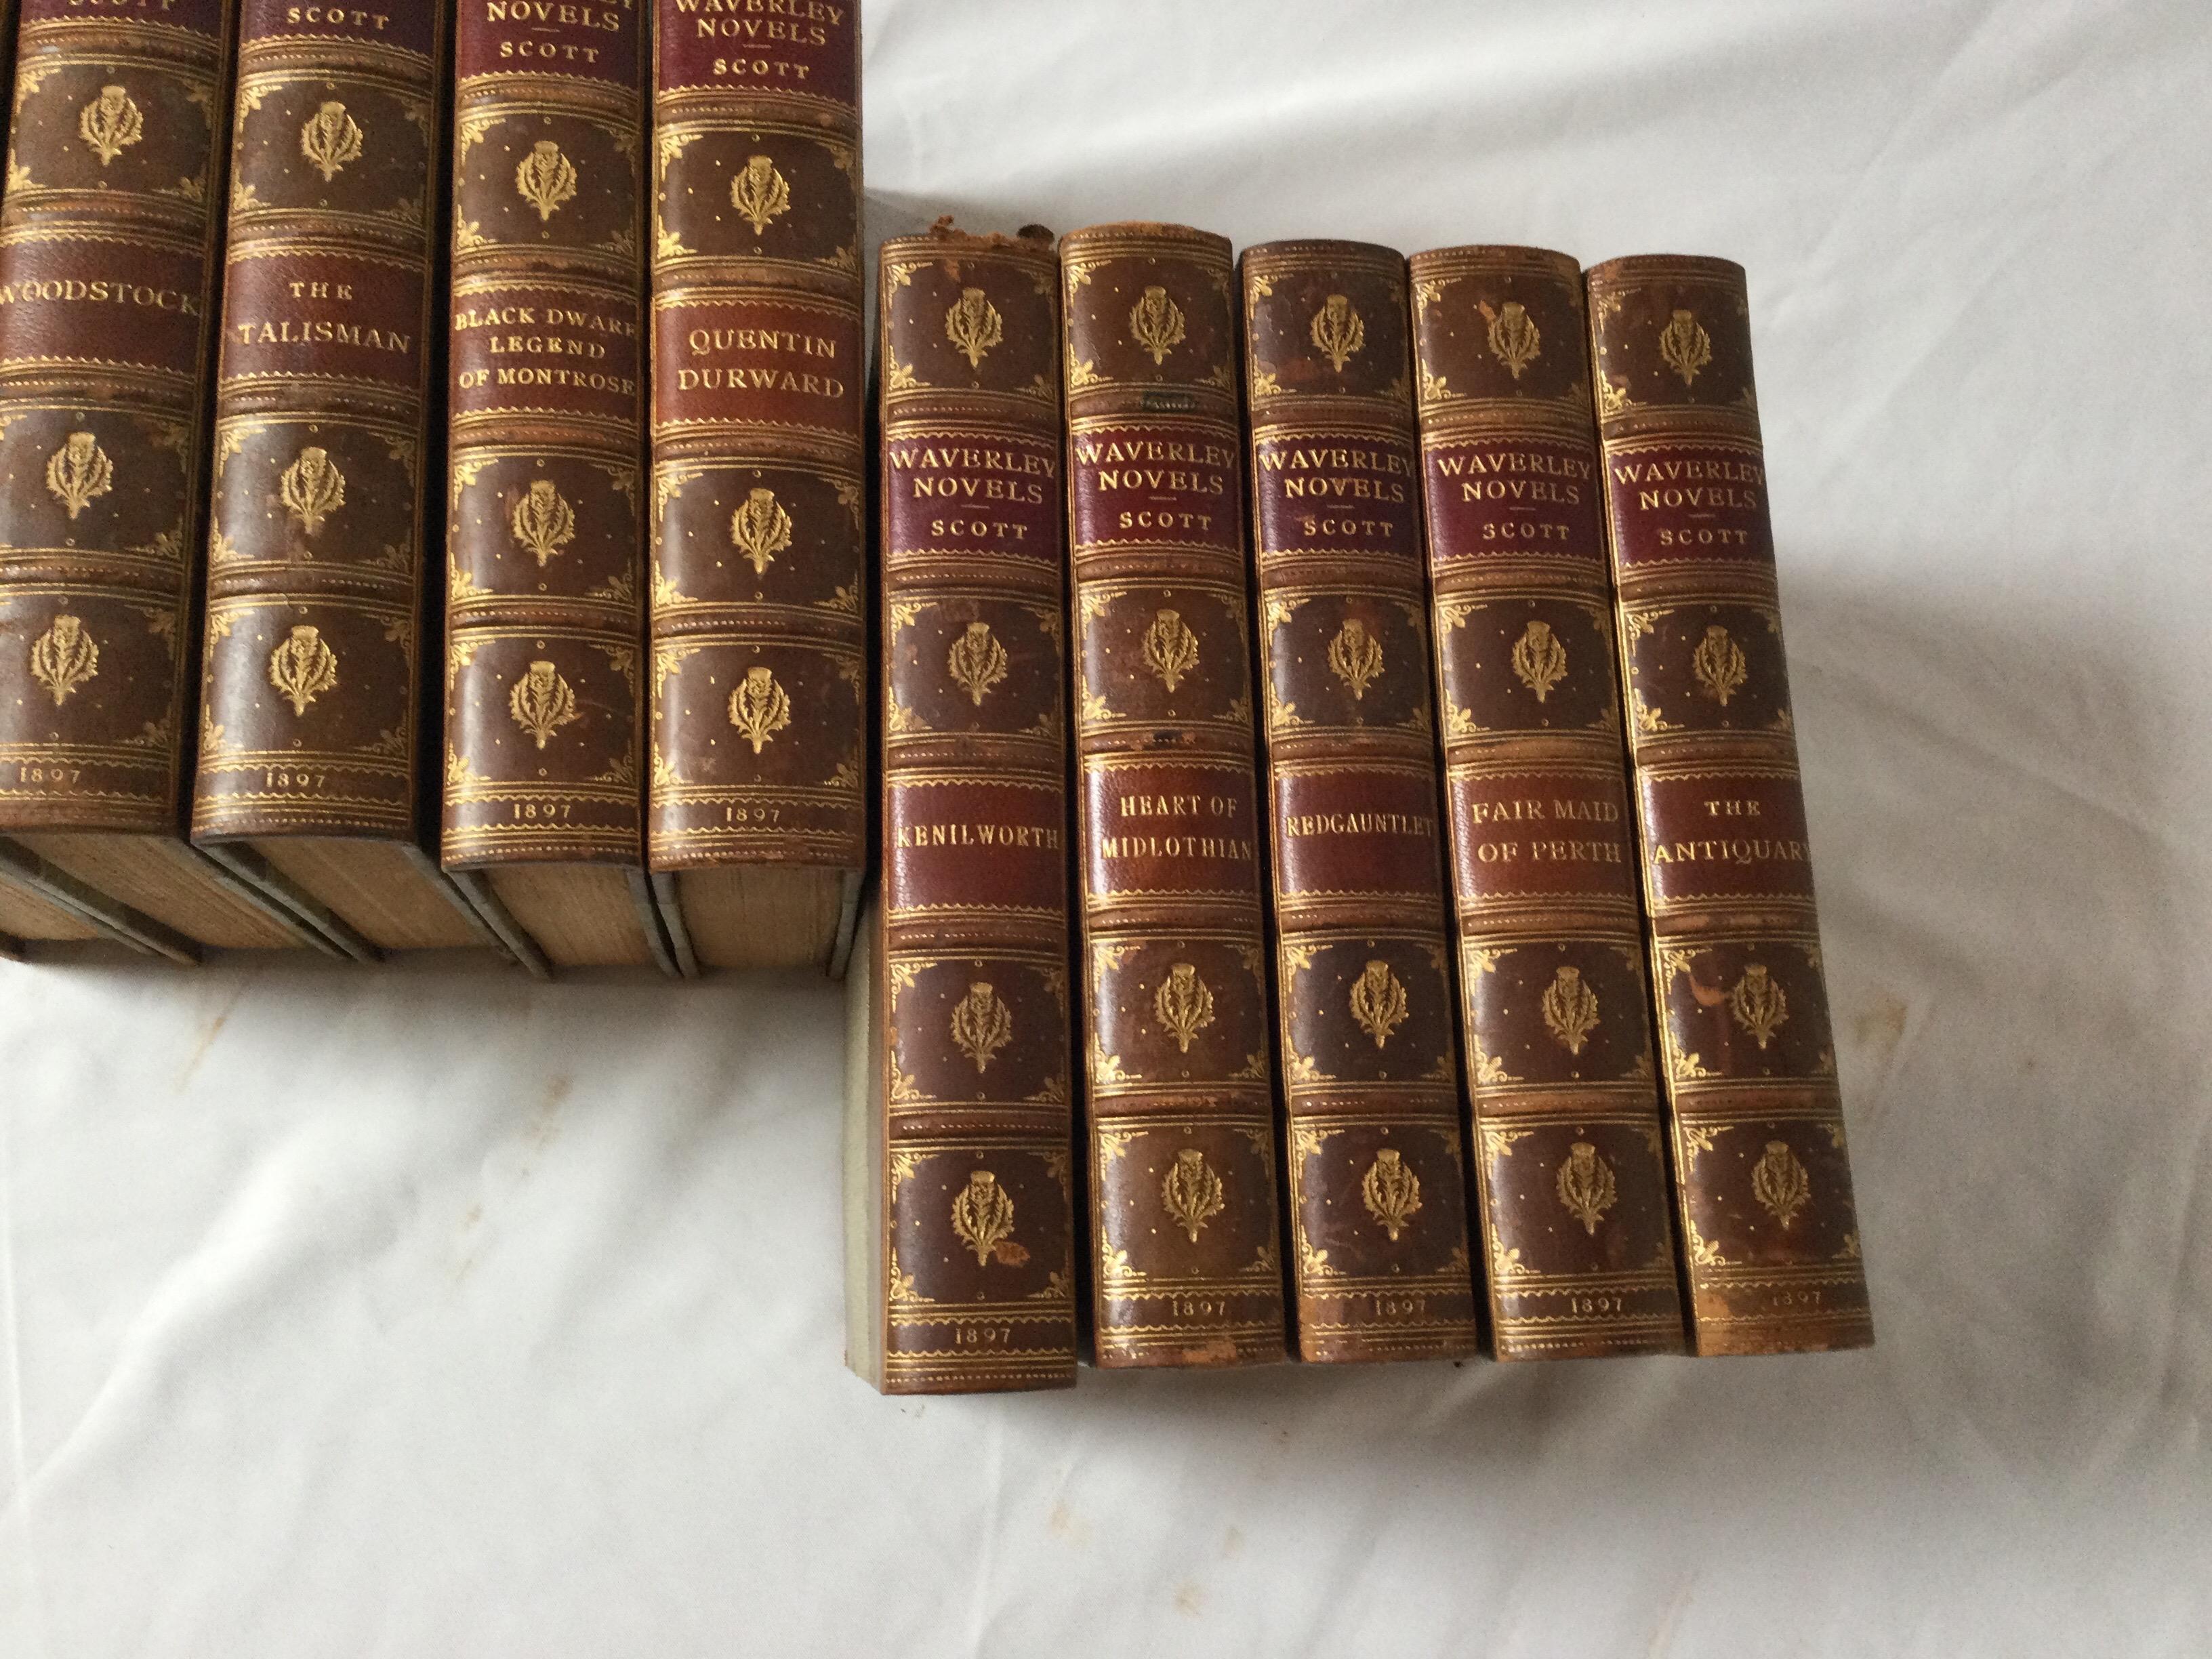 Set of 22 Leather Bound Books, The Waverly Novels by Sir Walter Scott 2